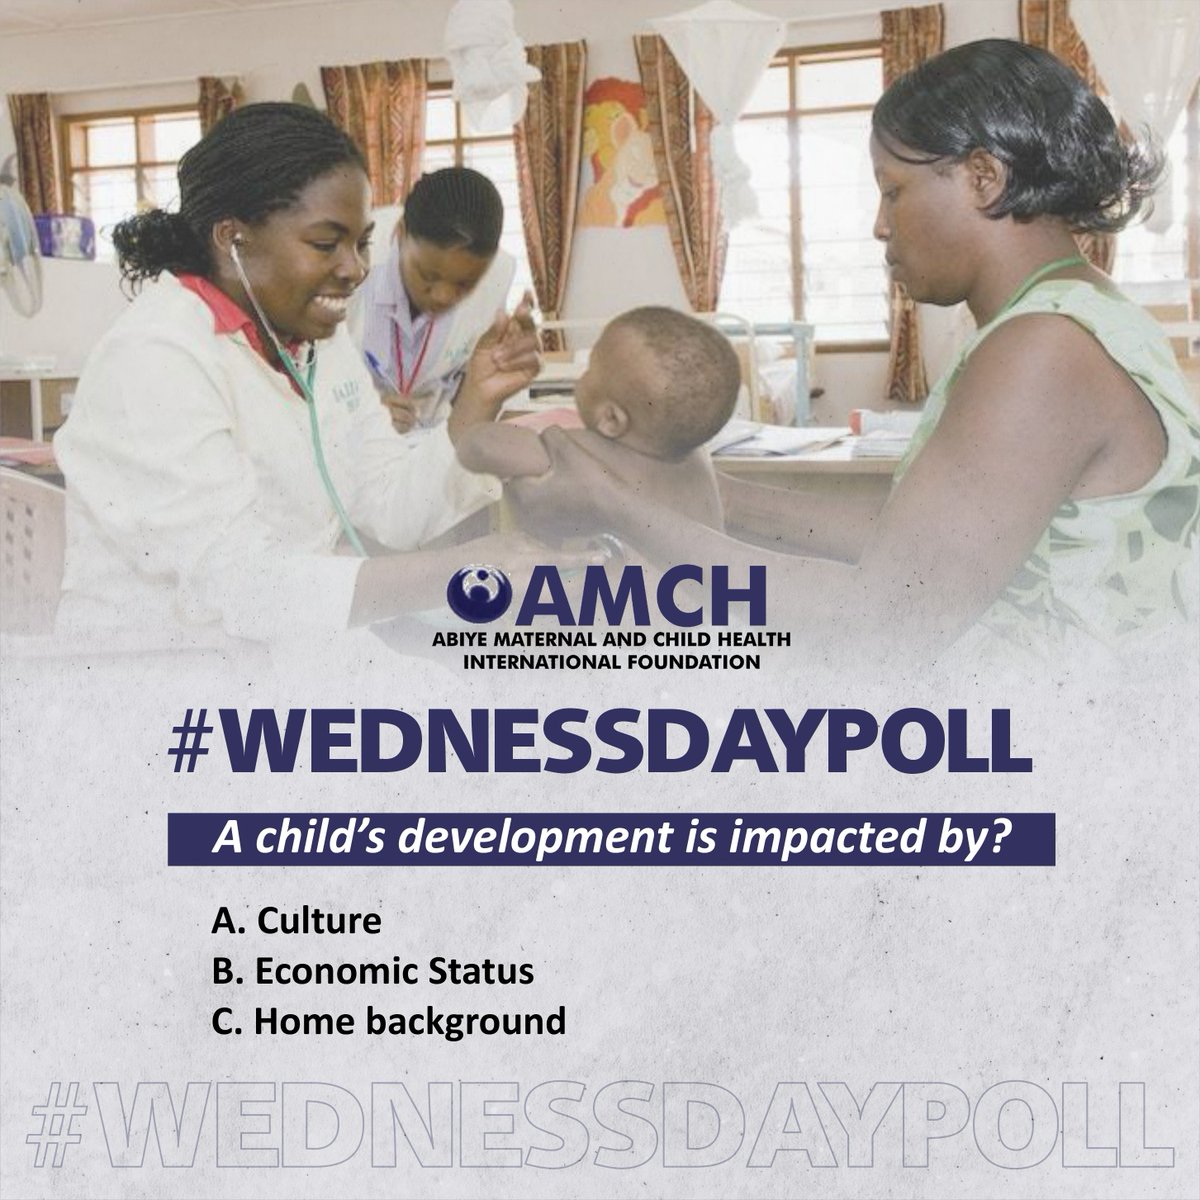 Welcome to AMCH's #WednesdayPoll.

Question: A child's development is impacted by?

A. Culture
B. Economic Status
C. Home background

Do you know the answer? Post your answer in the comment section.